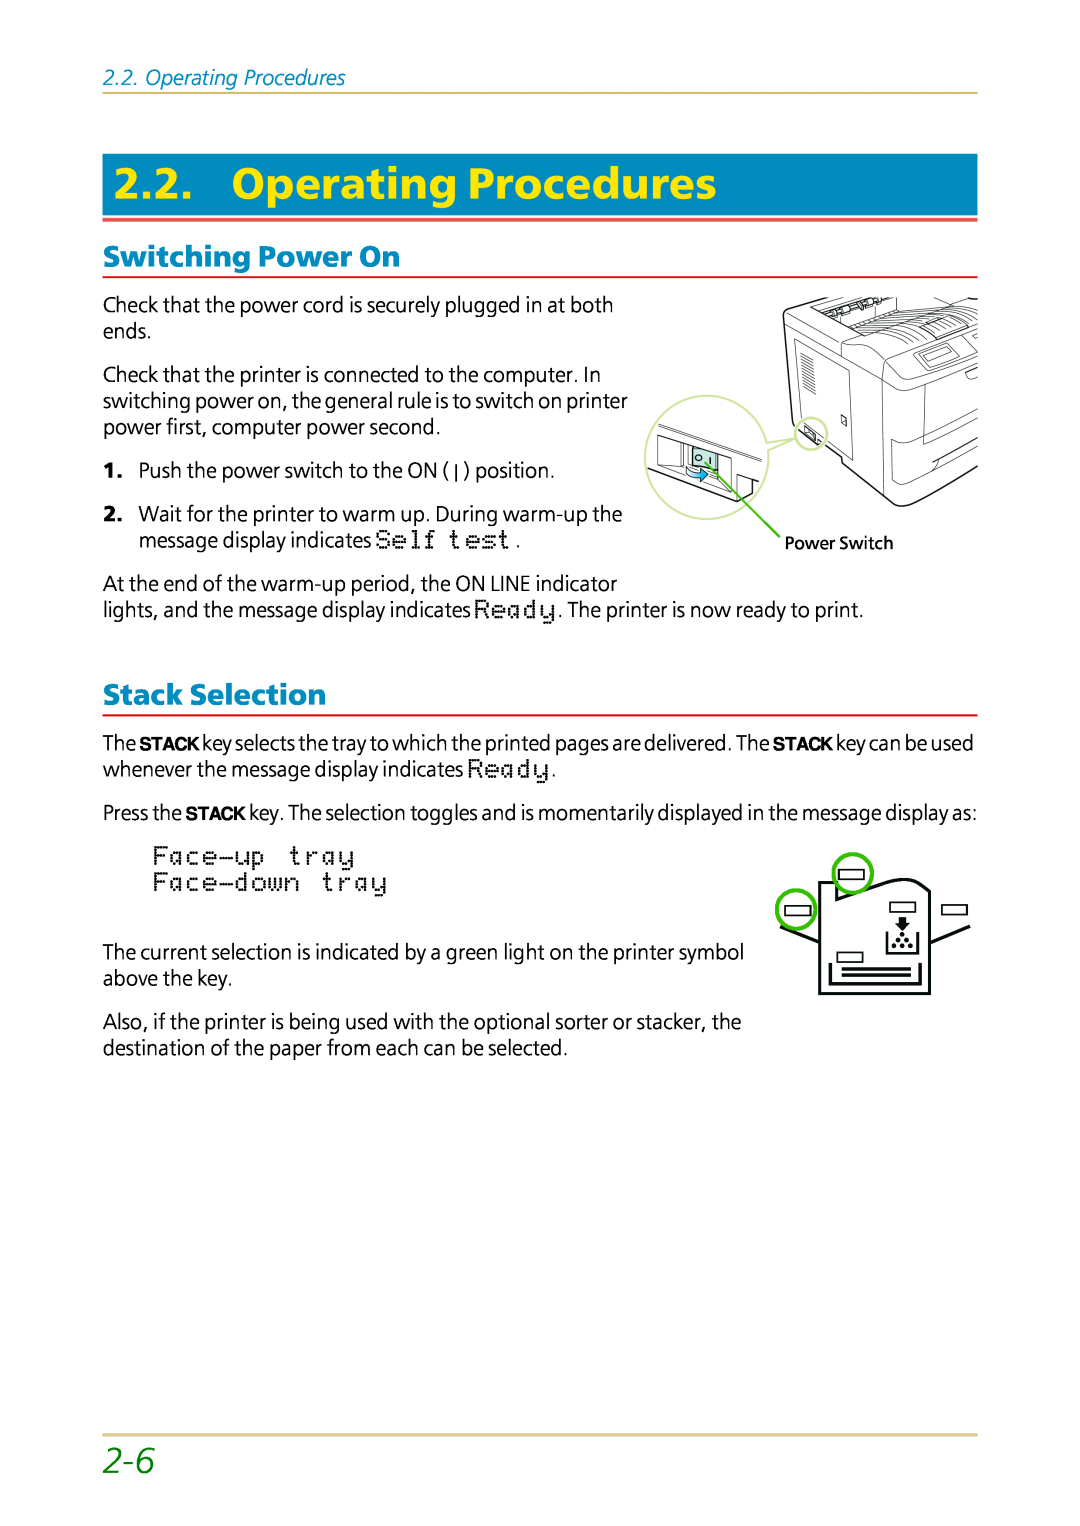 Kyocera FS-1700 user manual Operating Procedures, Switching Power On, Stack Selection 